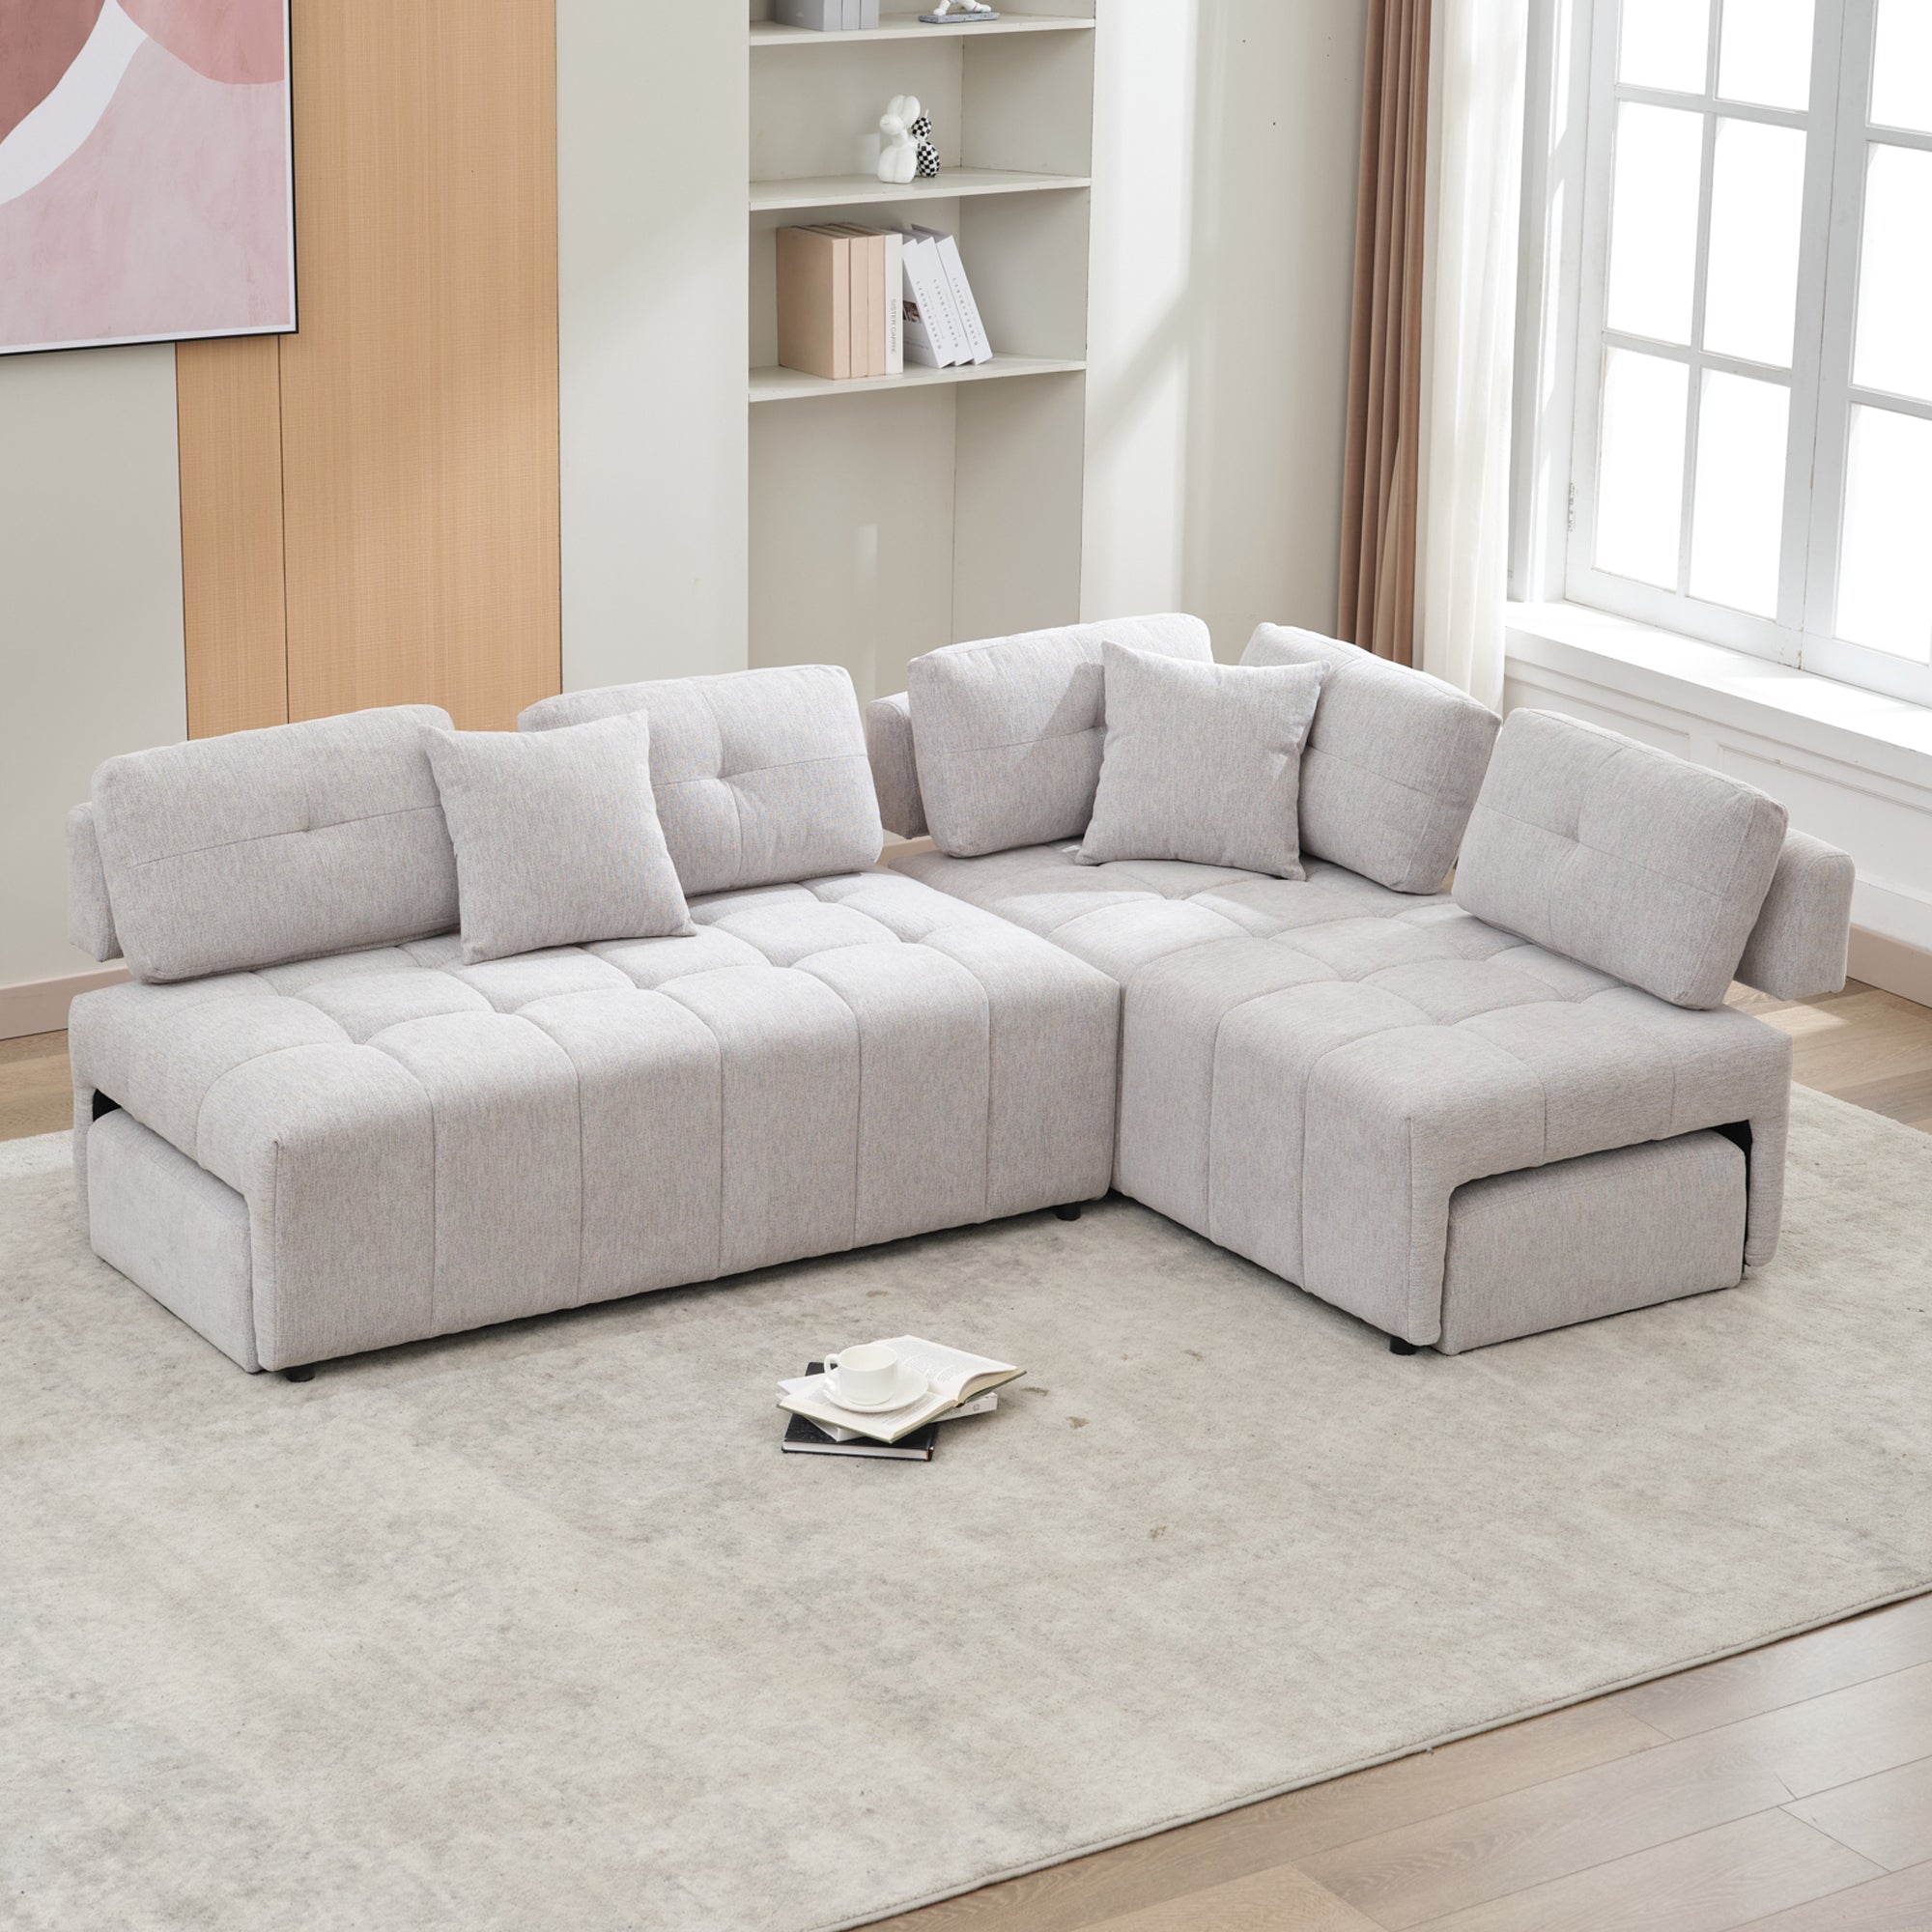 L-Shaped Sectional Sofa Couch w/ Stools & Pillows | Light Grey